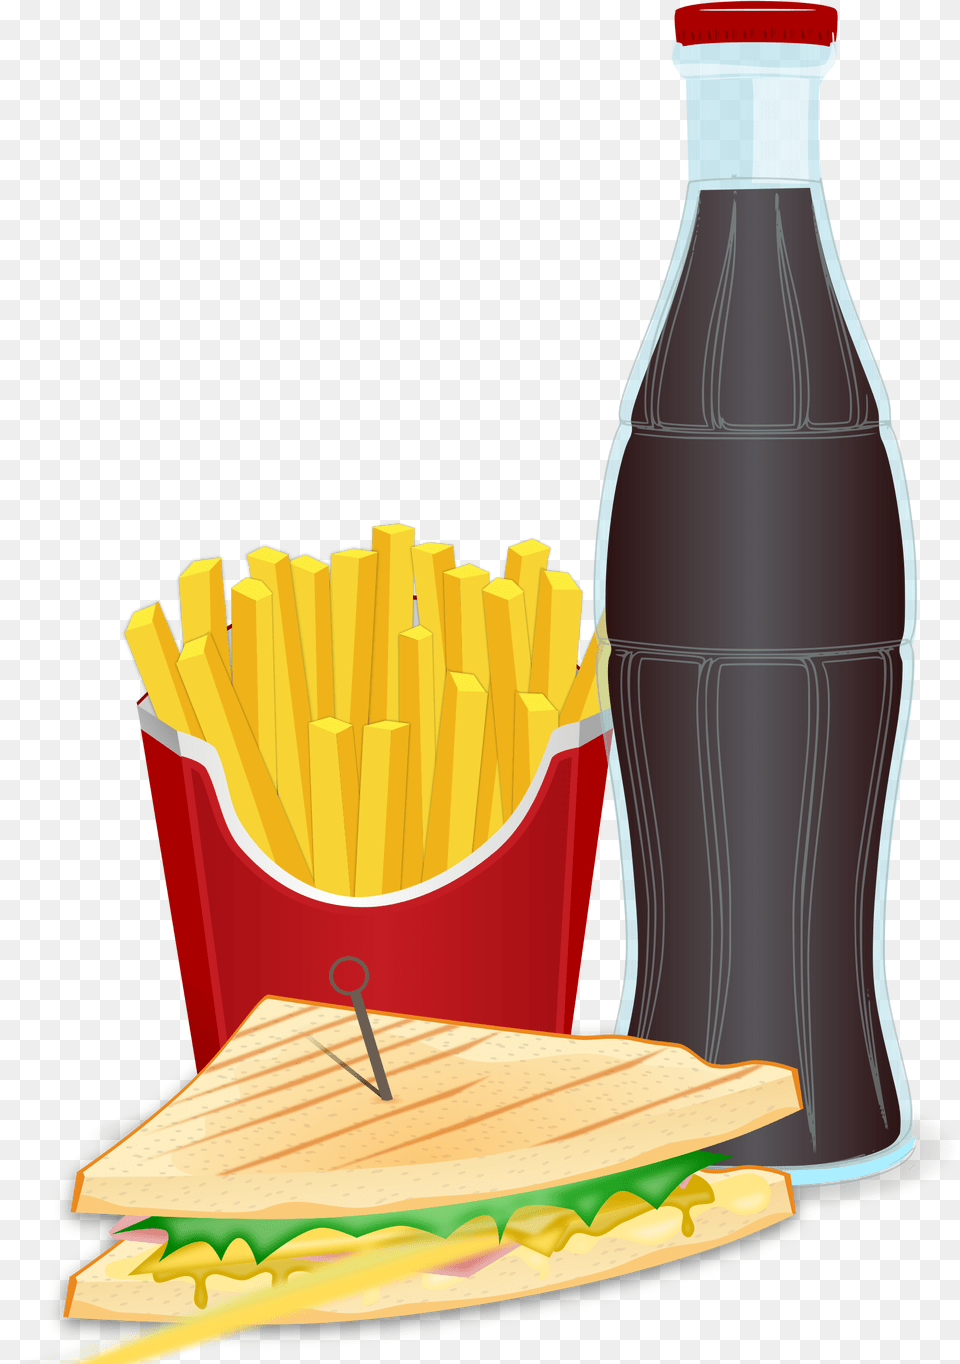 This Icons Design Of Sandwich Menu, Beverage, Soda, Food, Fries Free Png Download